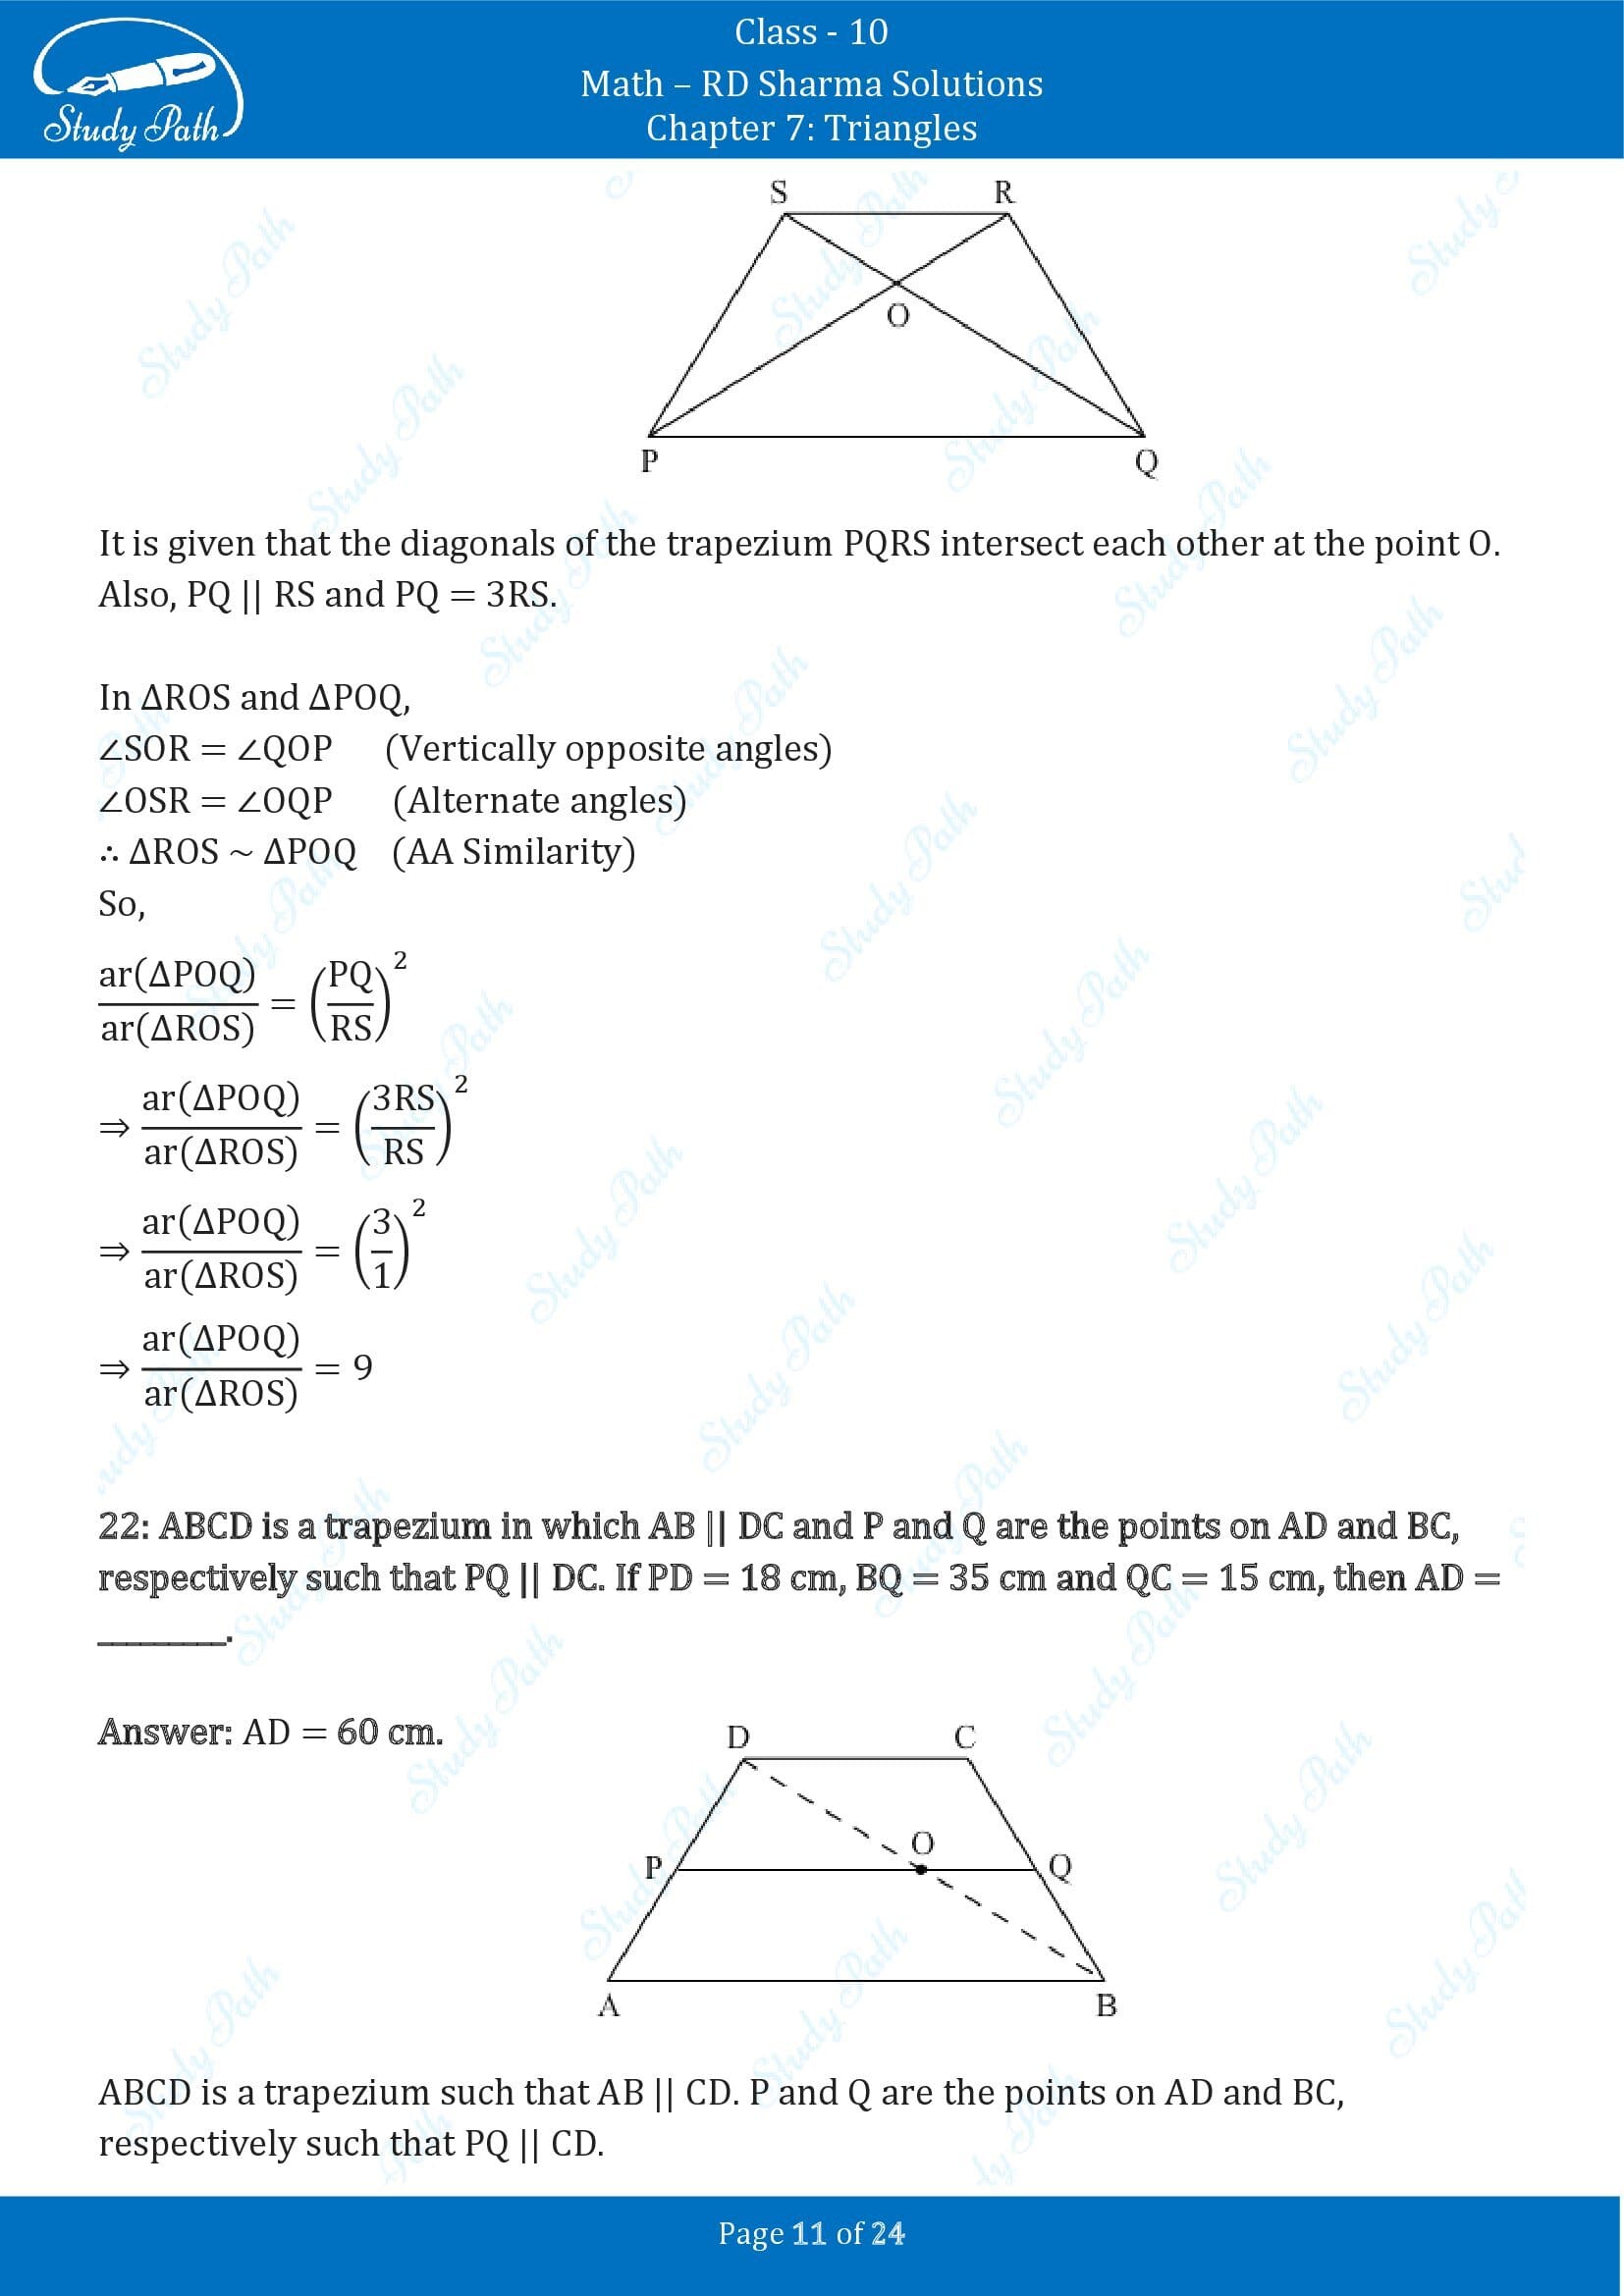 RD Sharma Solutions Class 10 Chapter 7 Triangles Fill in the Blank Type Questions FBQs 00011